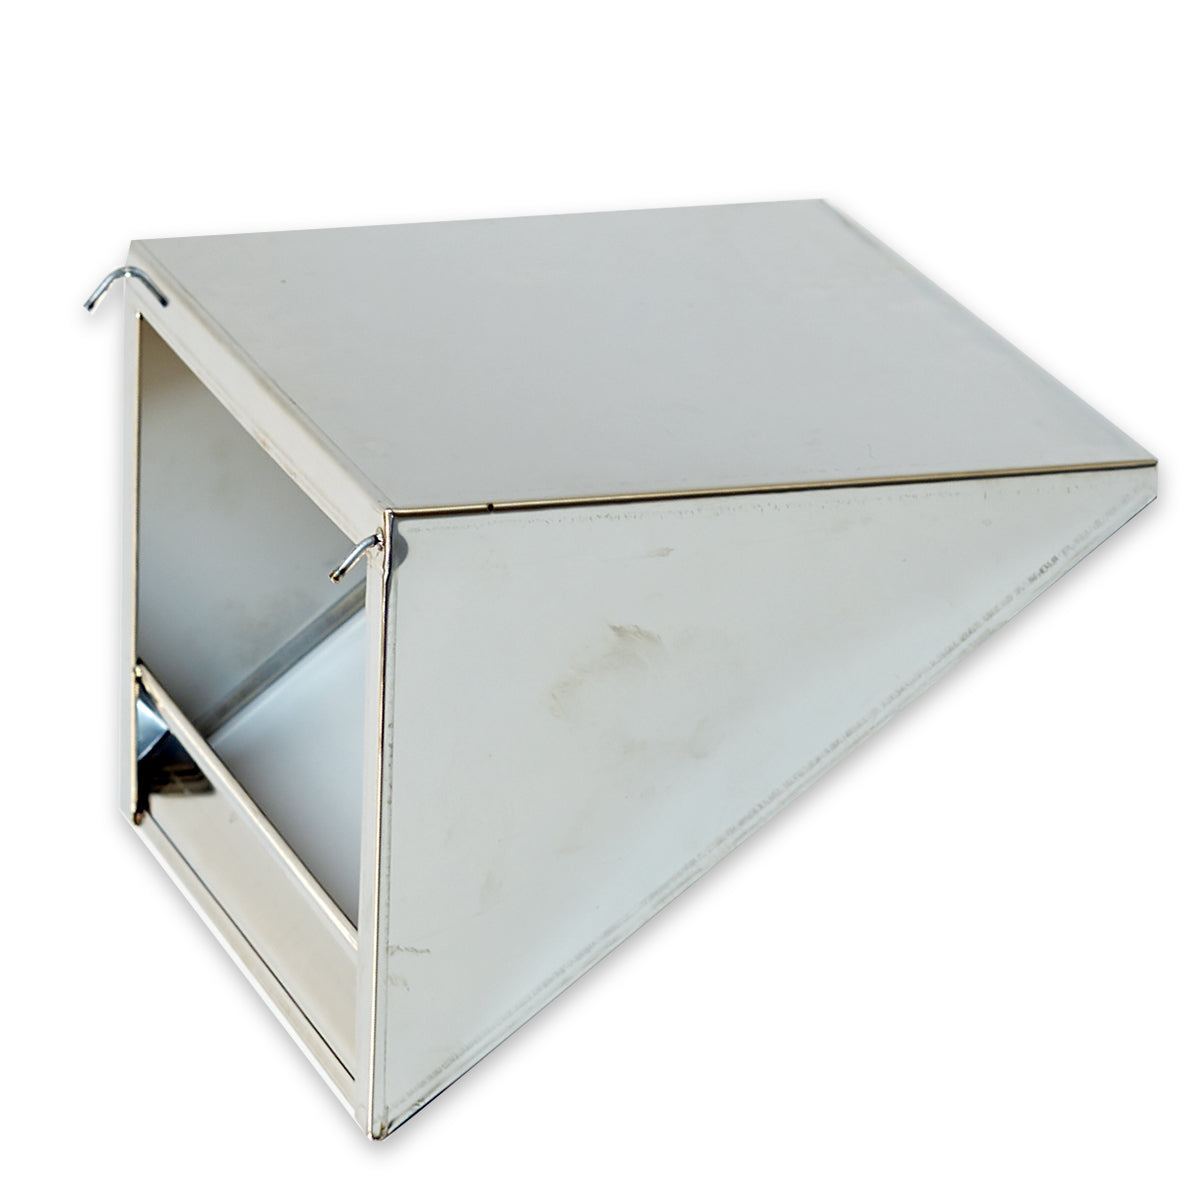 16" x 24" Canner Shelf Only